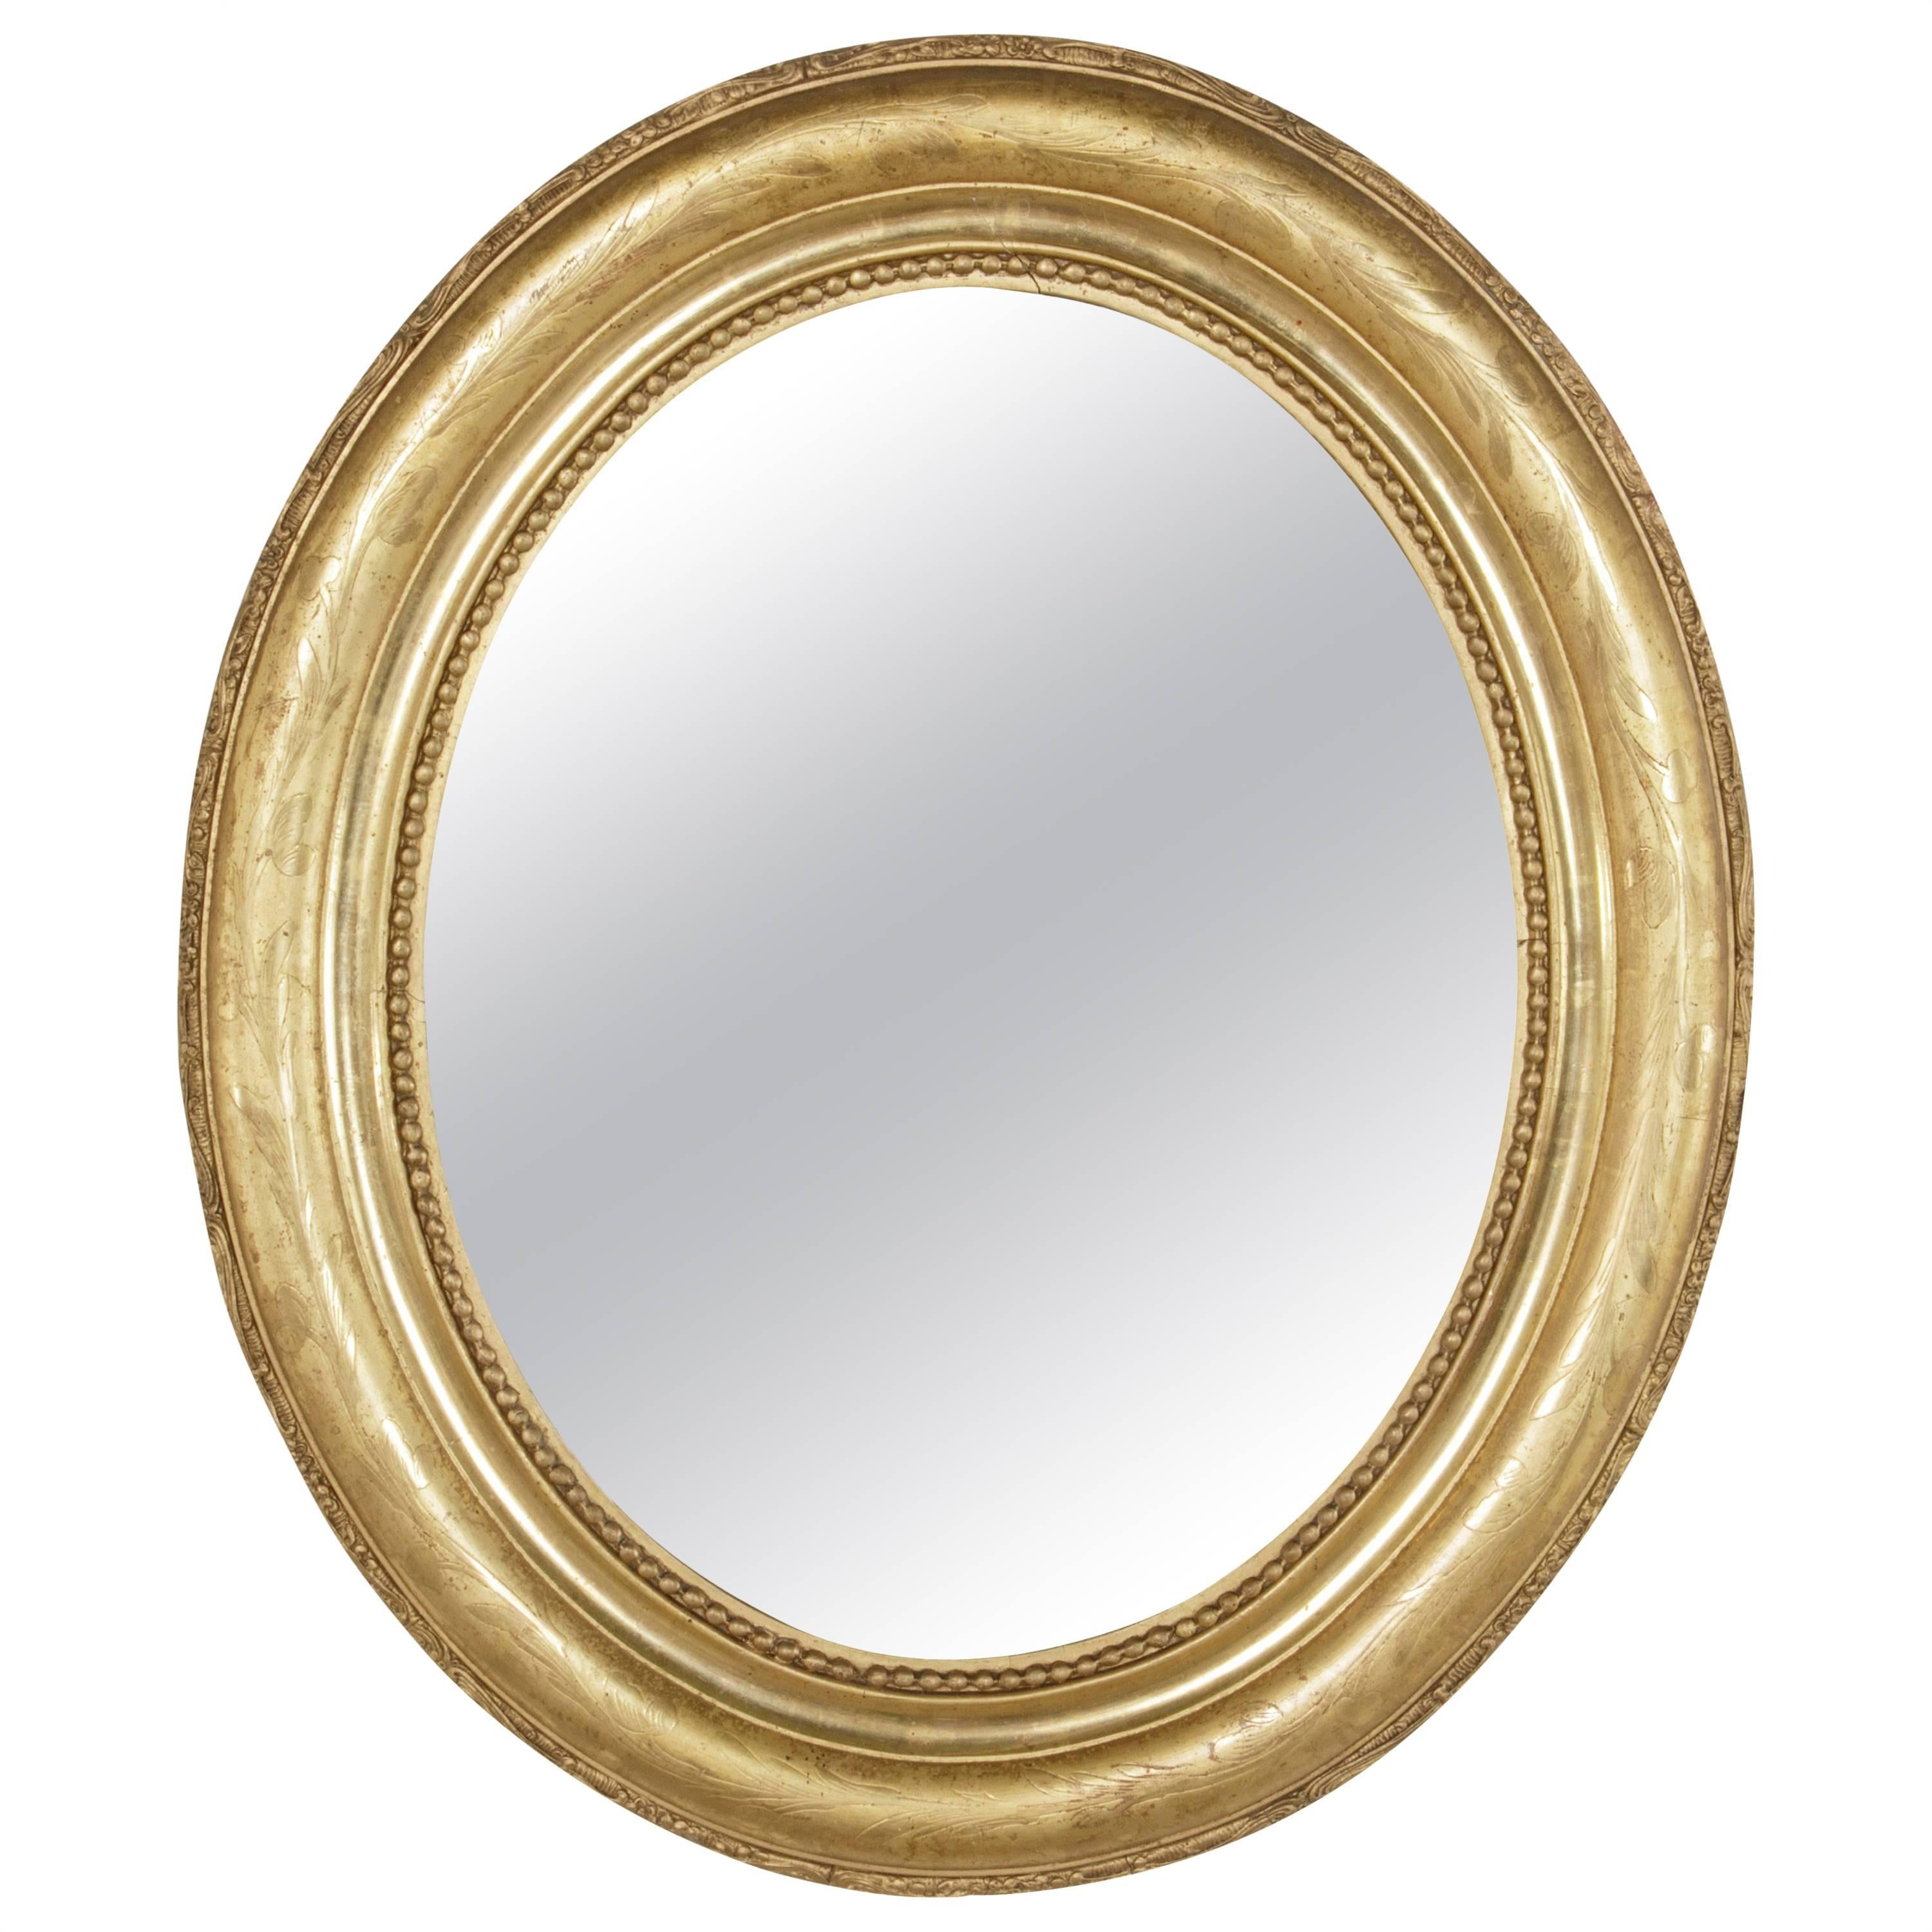 Small-Scale 19th Century French Oval Giltwood Mirror Napoleon III Period